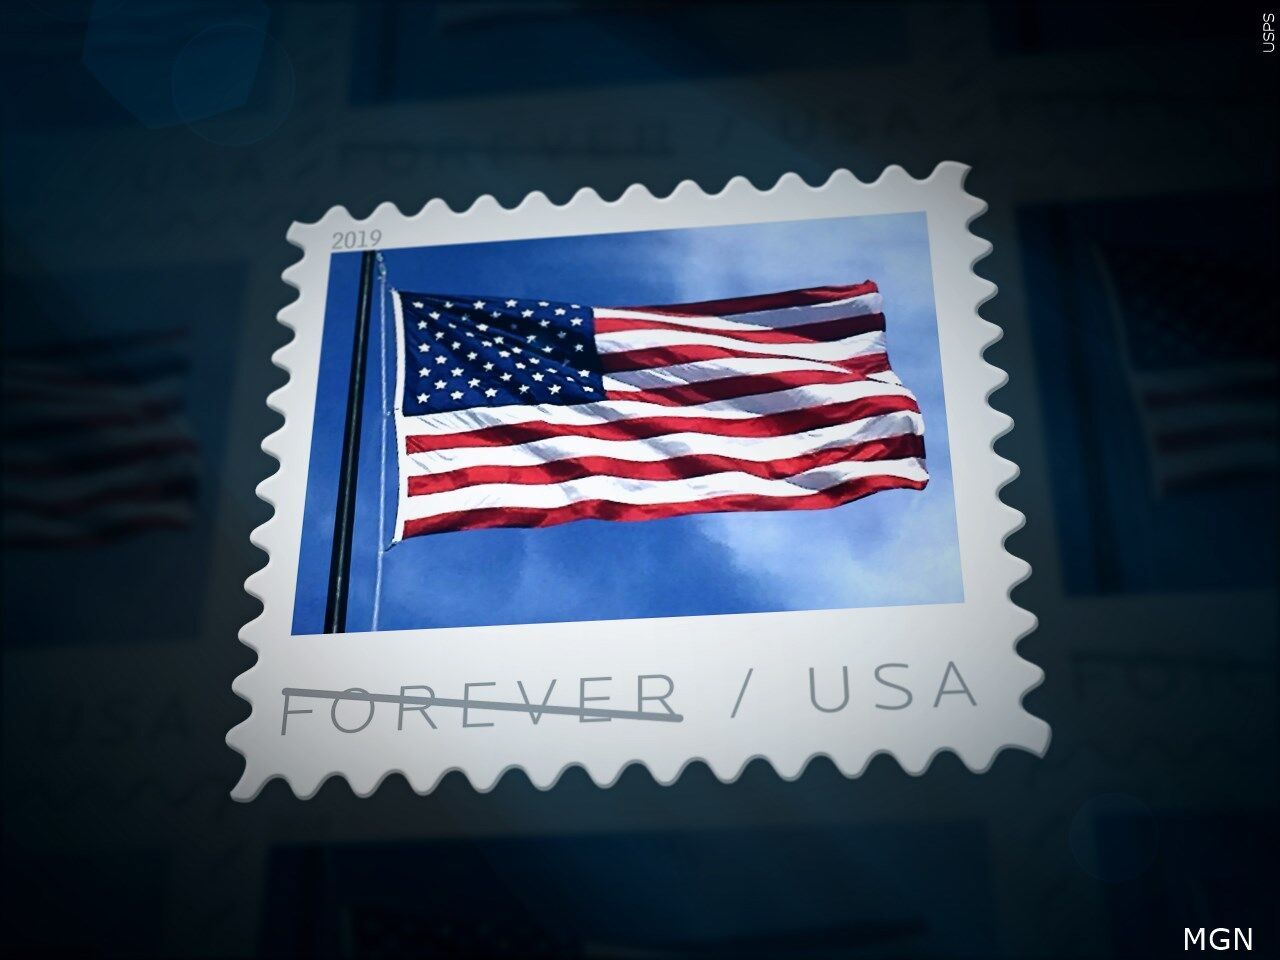 USPS warns of counterfeit Forever stamps: How to spot fake vs. real